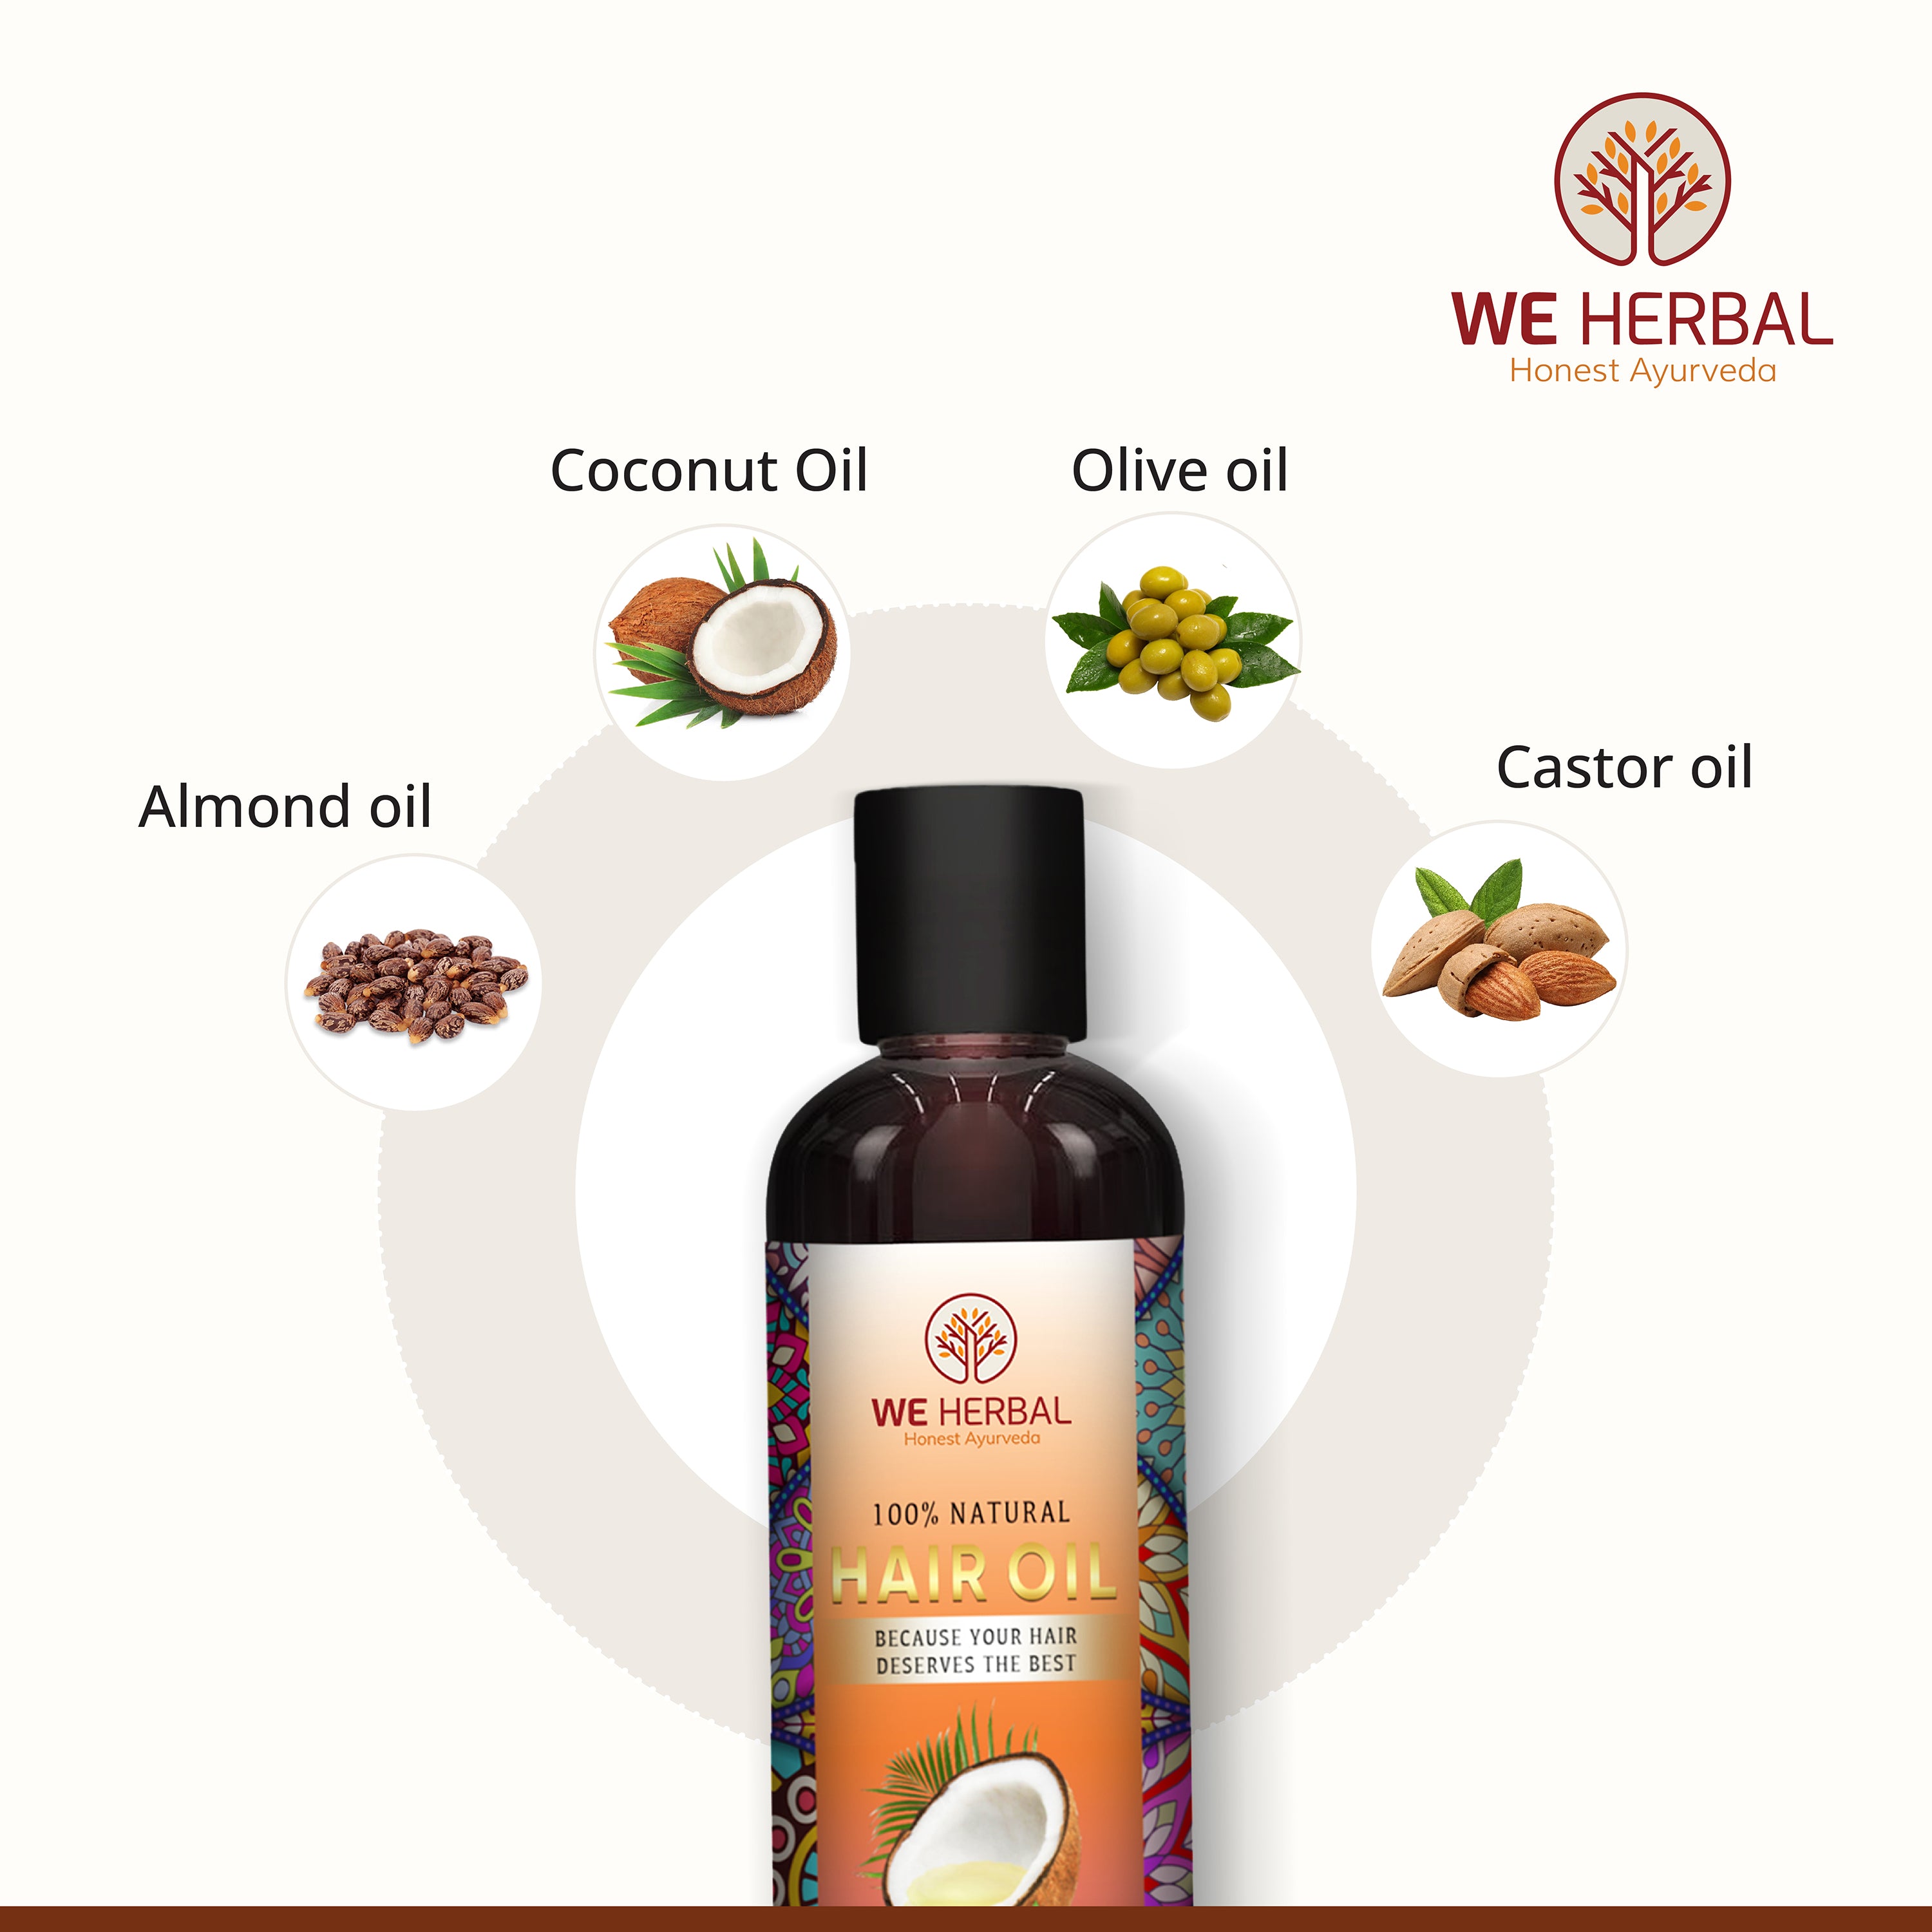 Hair Oil | Chemical Free We Herbal | Back to the Nature